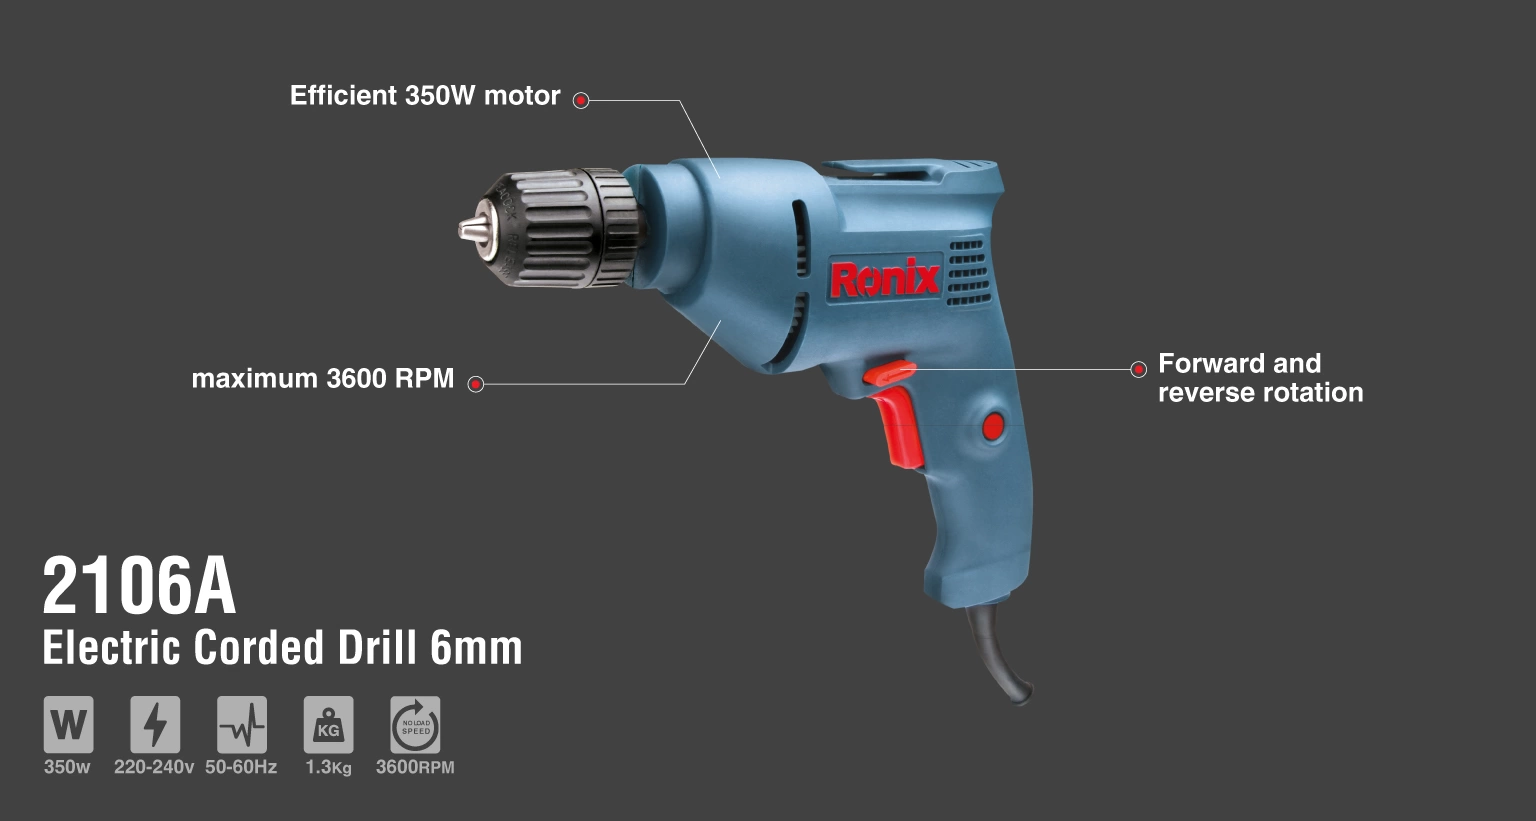 Electric Corded drill 6mm 350W_details